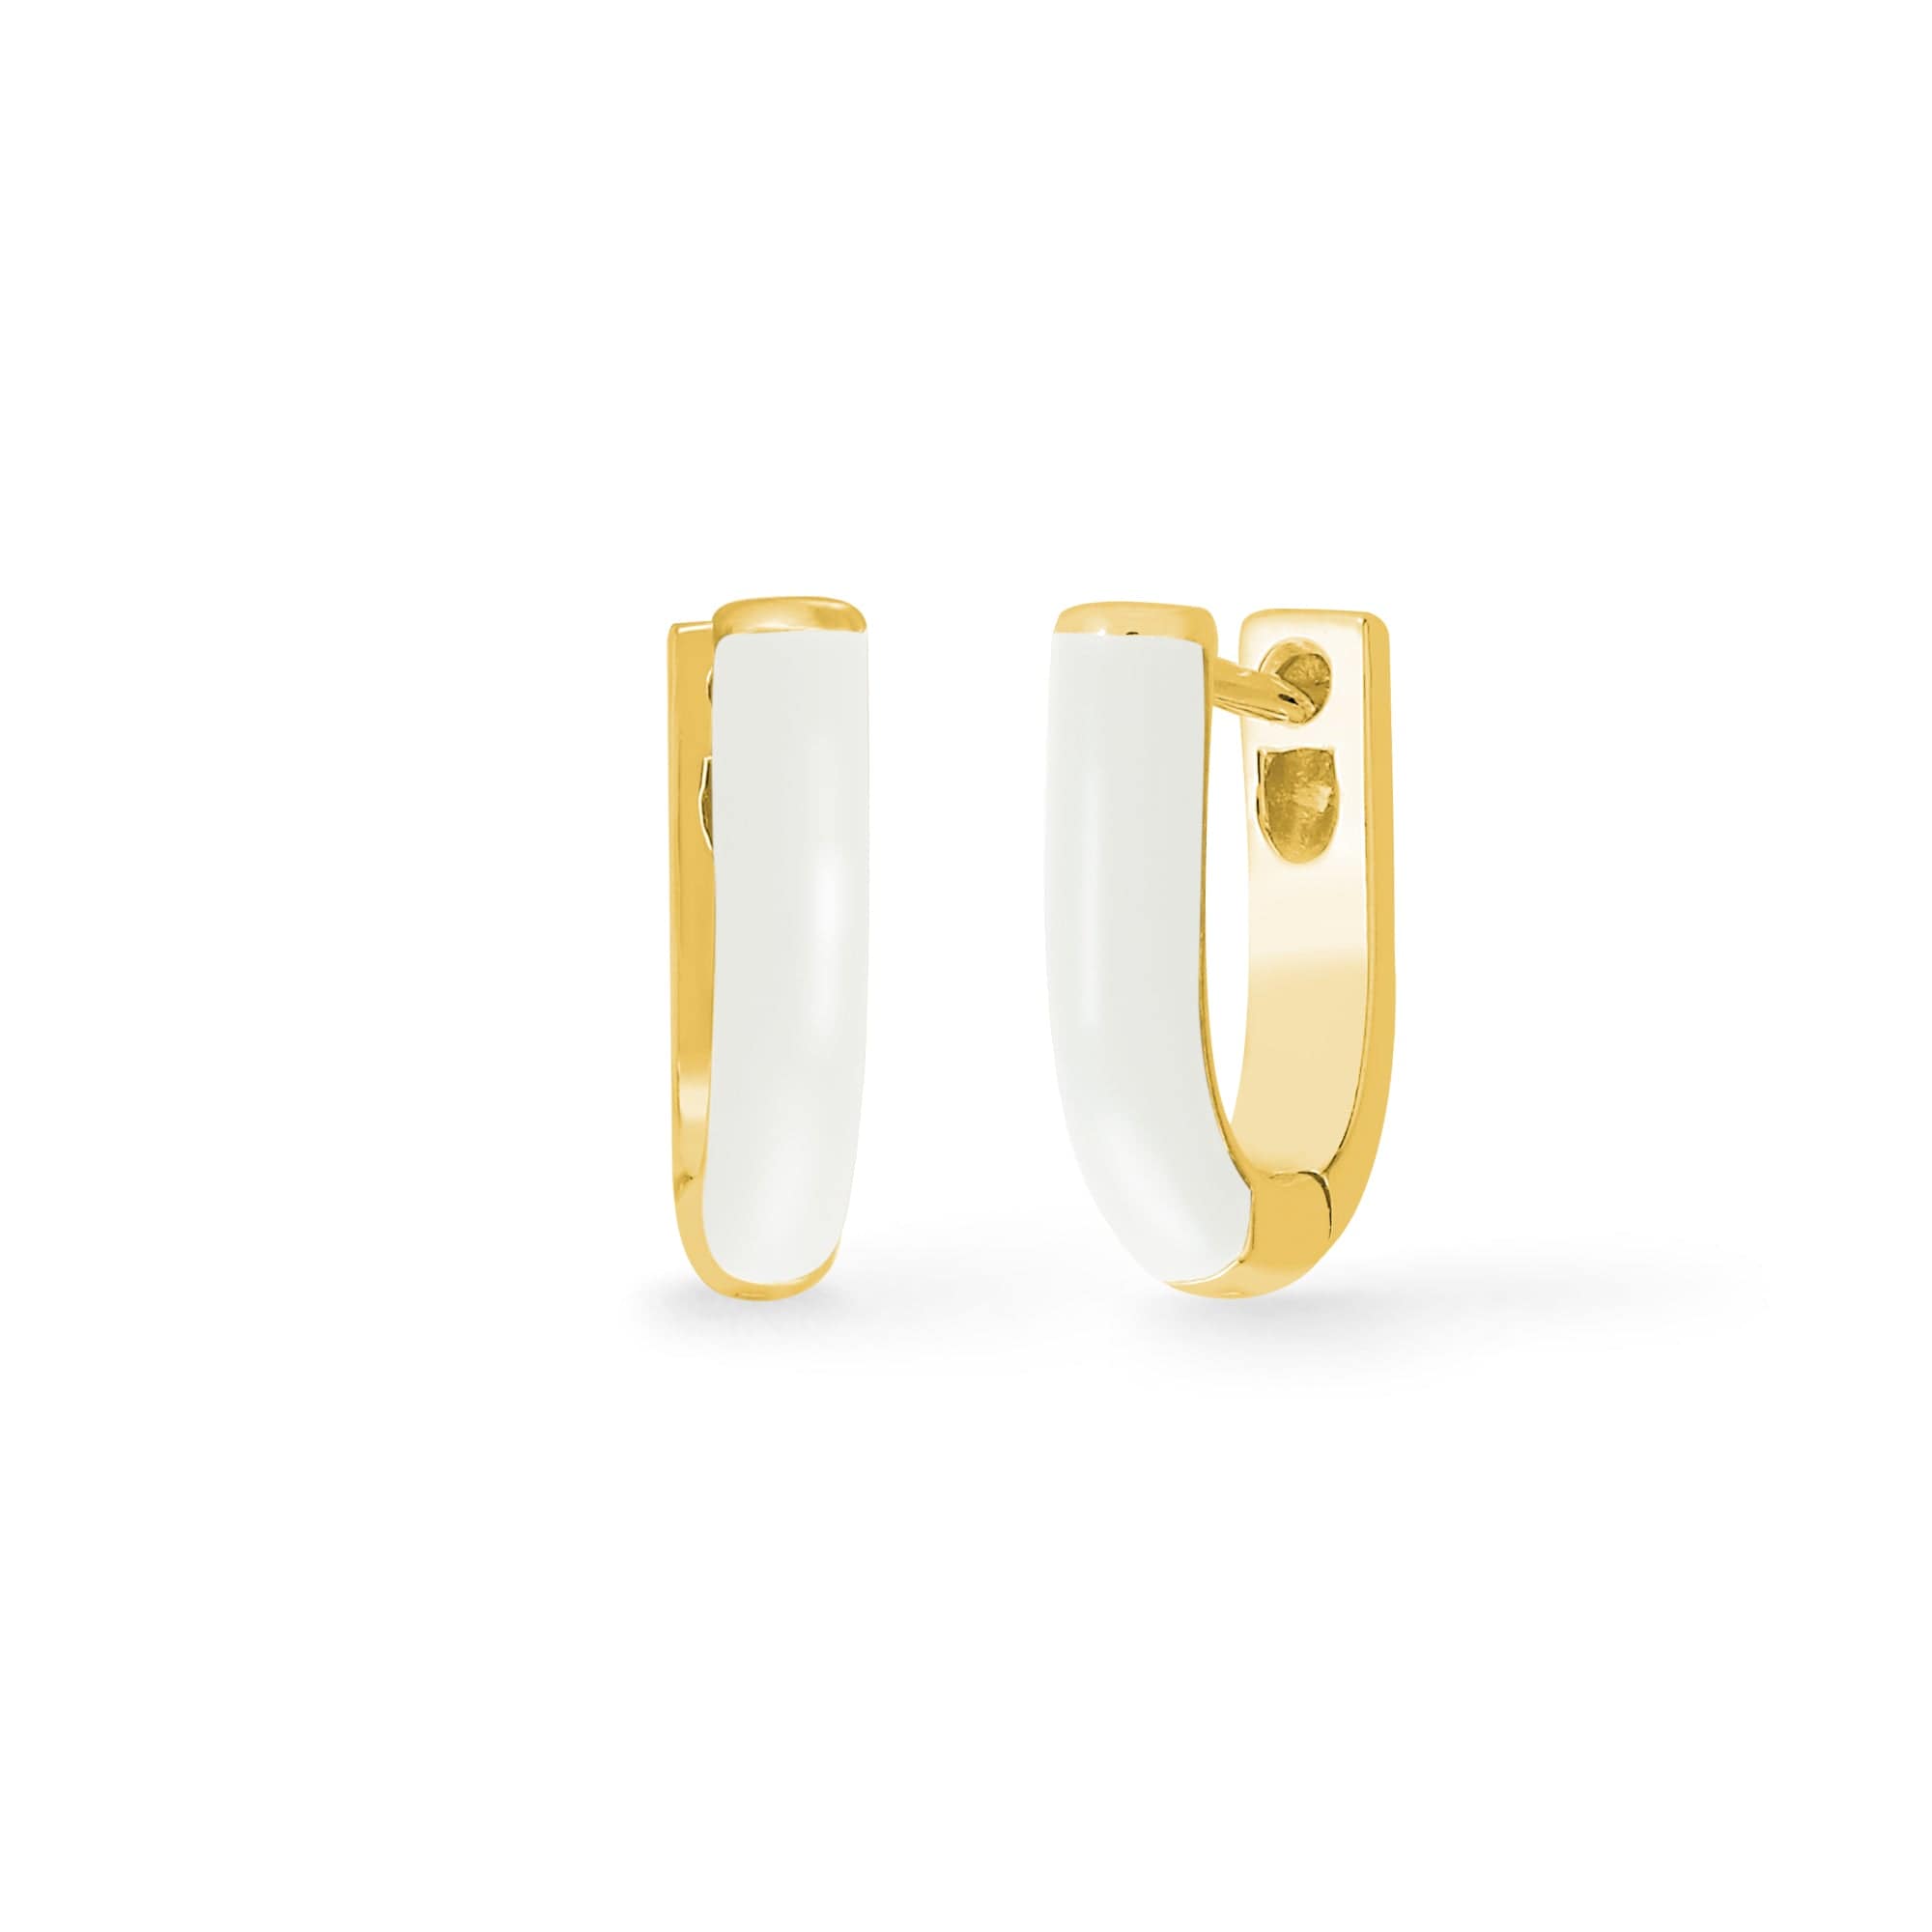 Boma Jewelry Earrings White / 14K Gold Plated U-Shape Huggie Hoops with Color